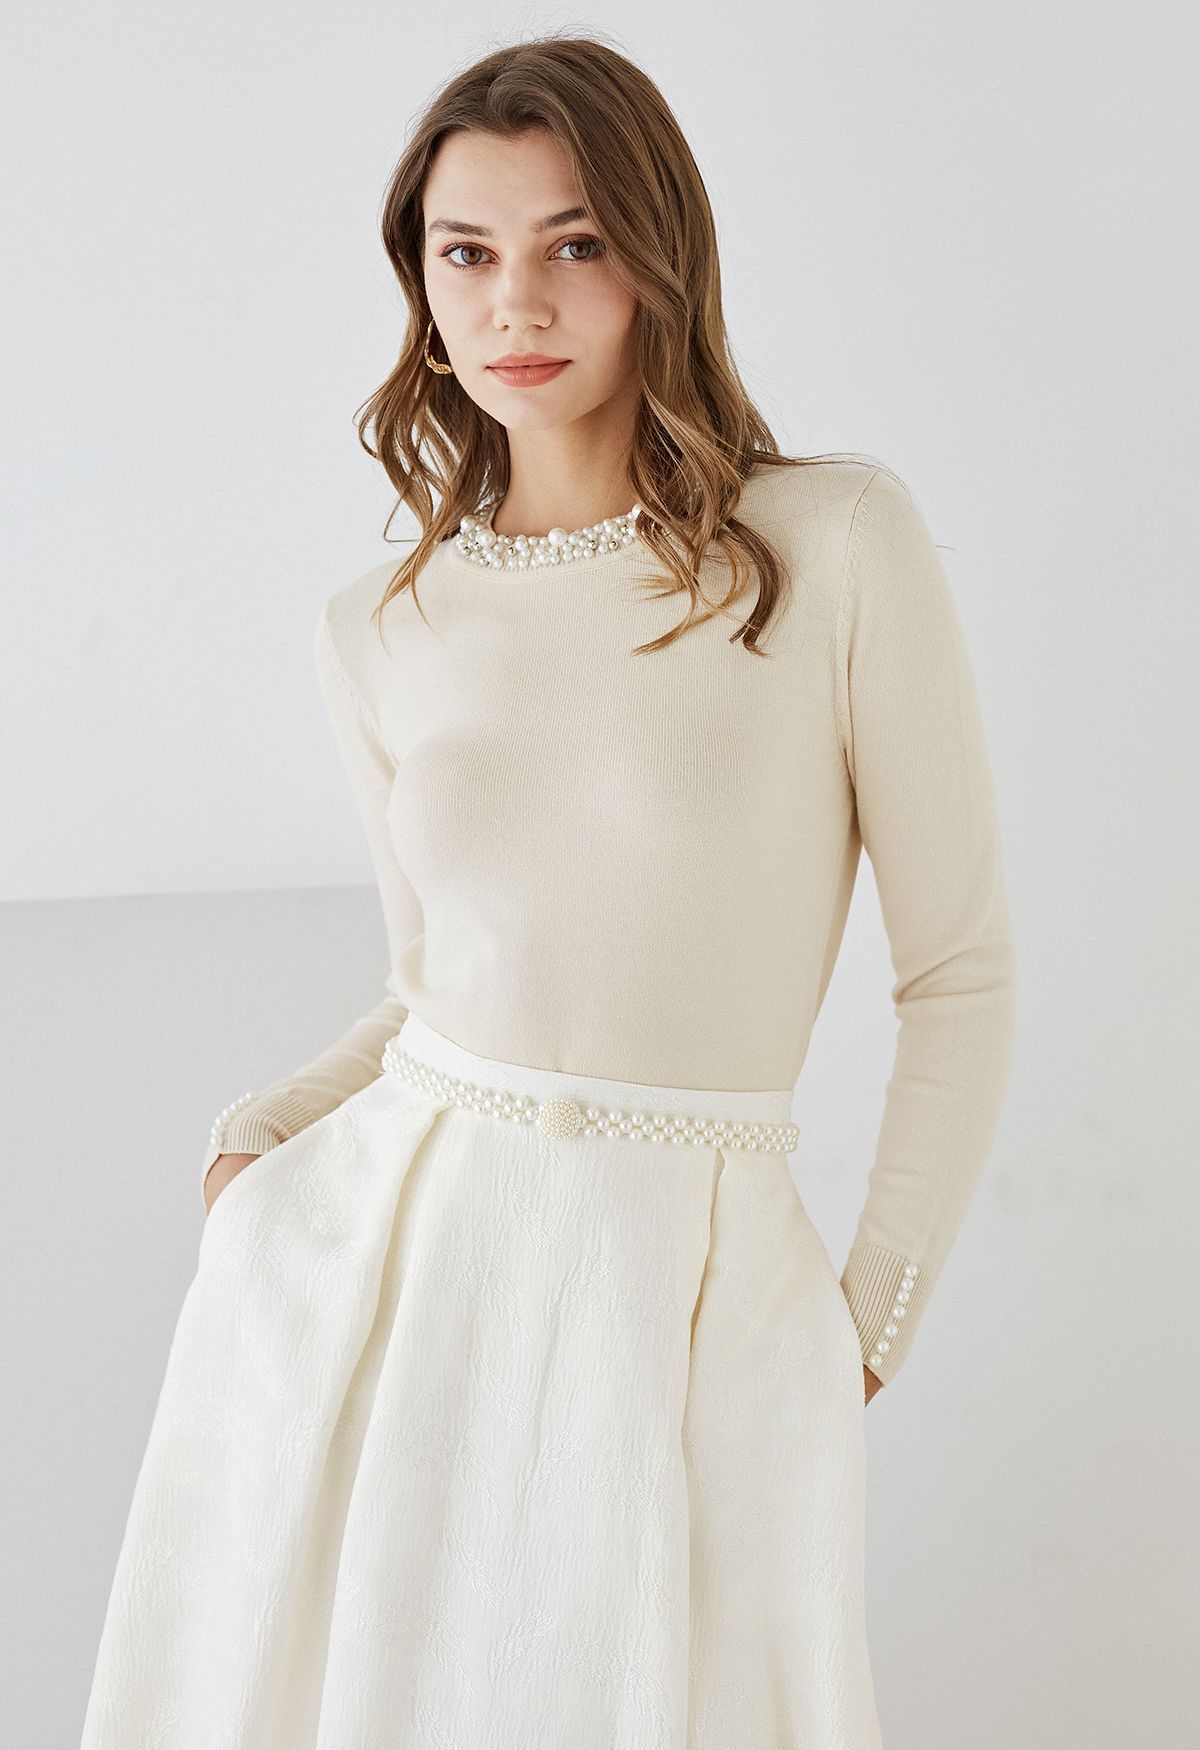 Pearl Trimmed Soft Knit Top in Cream | Chicwish